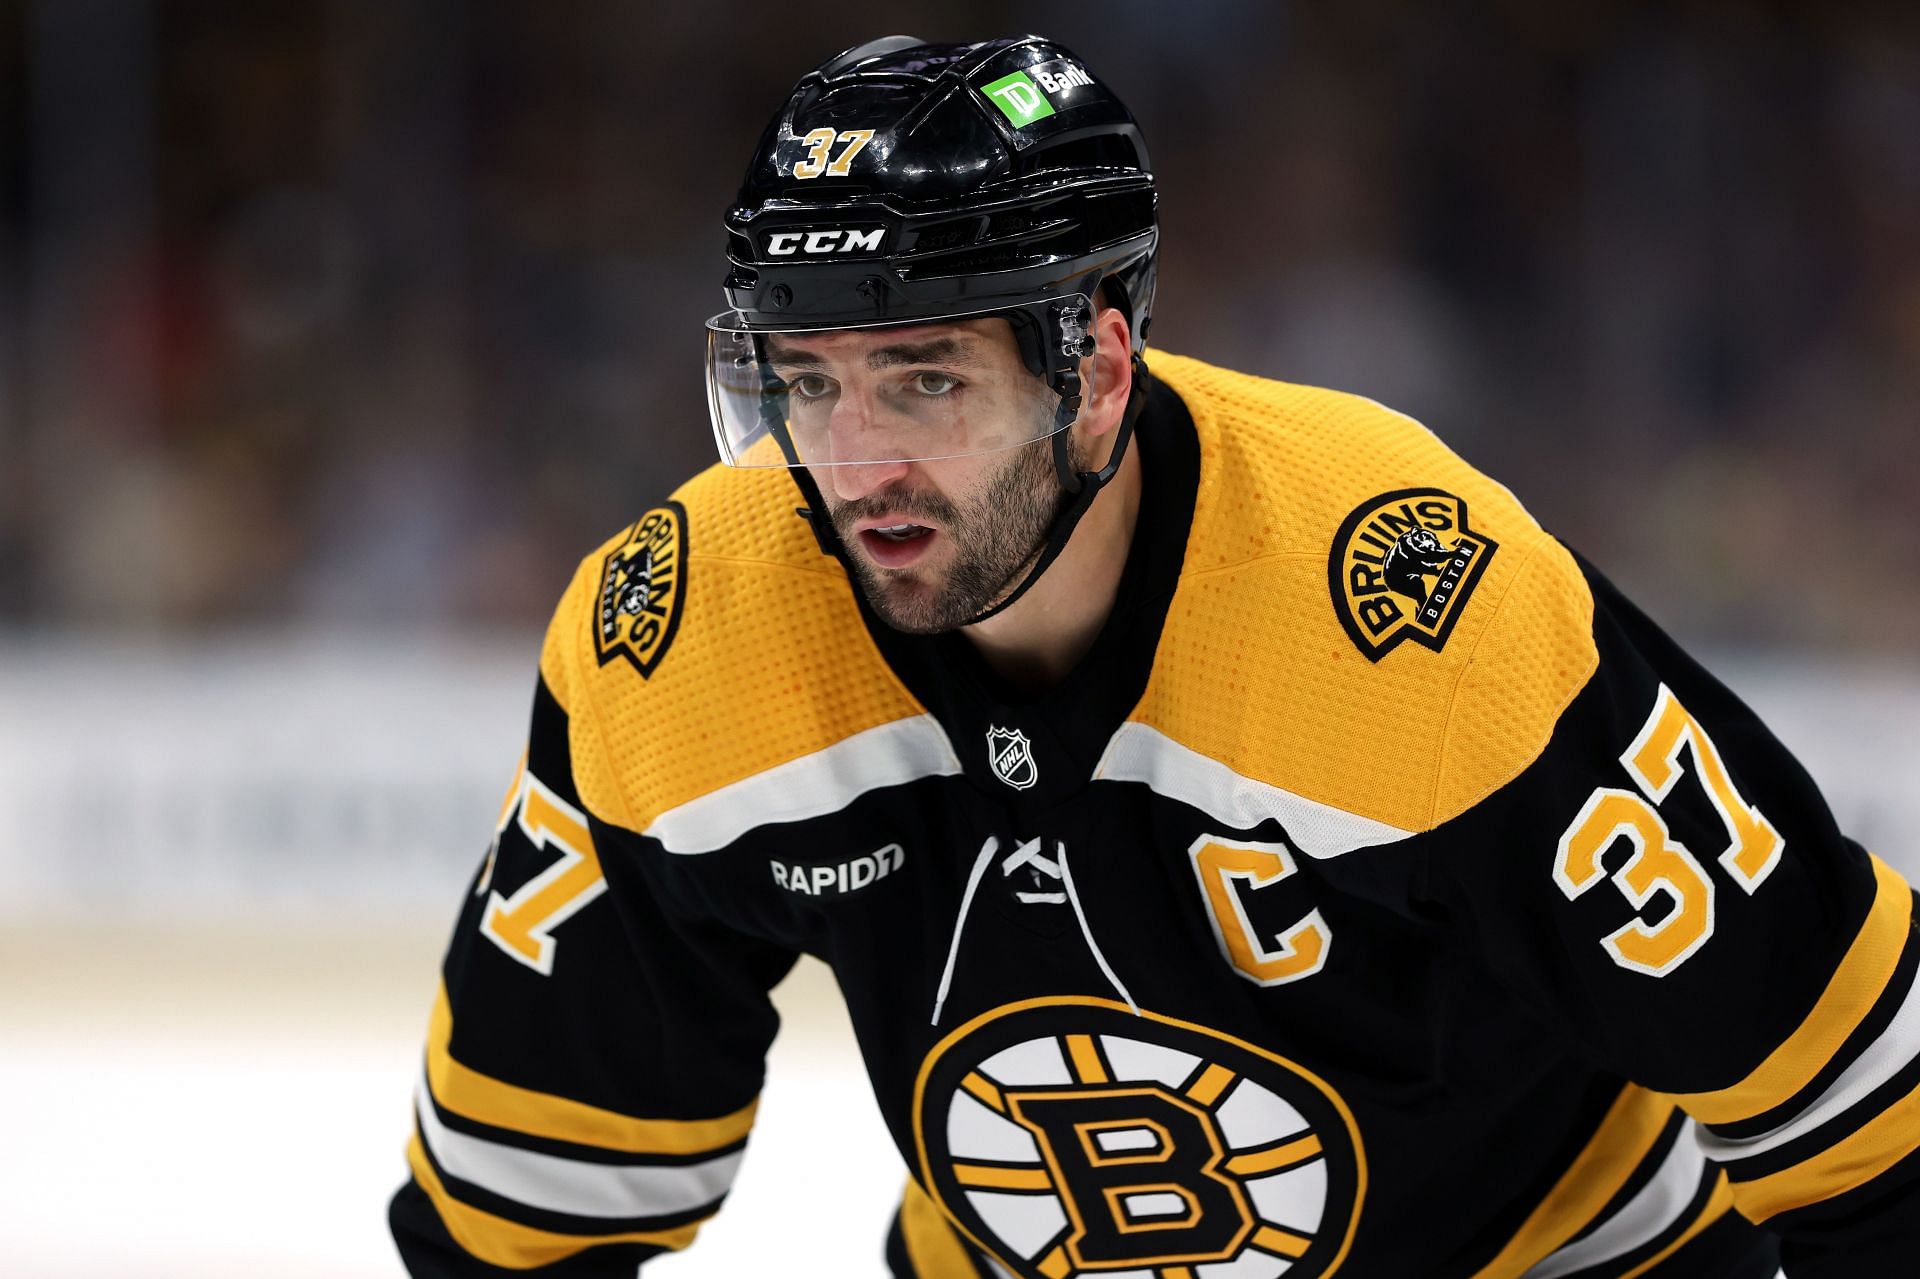 Bruins captain Patrice Bergeron retires from NHL 